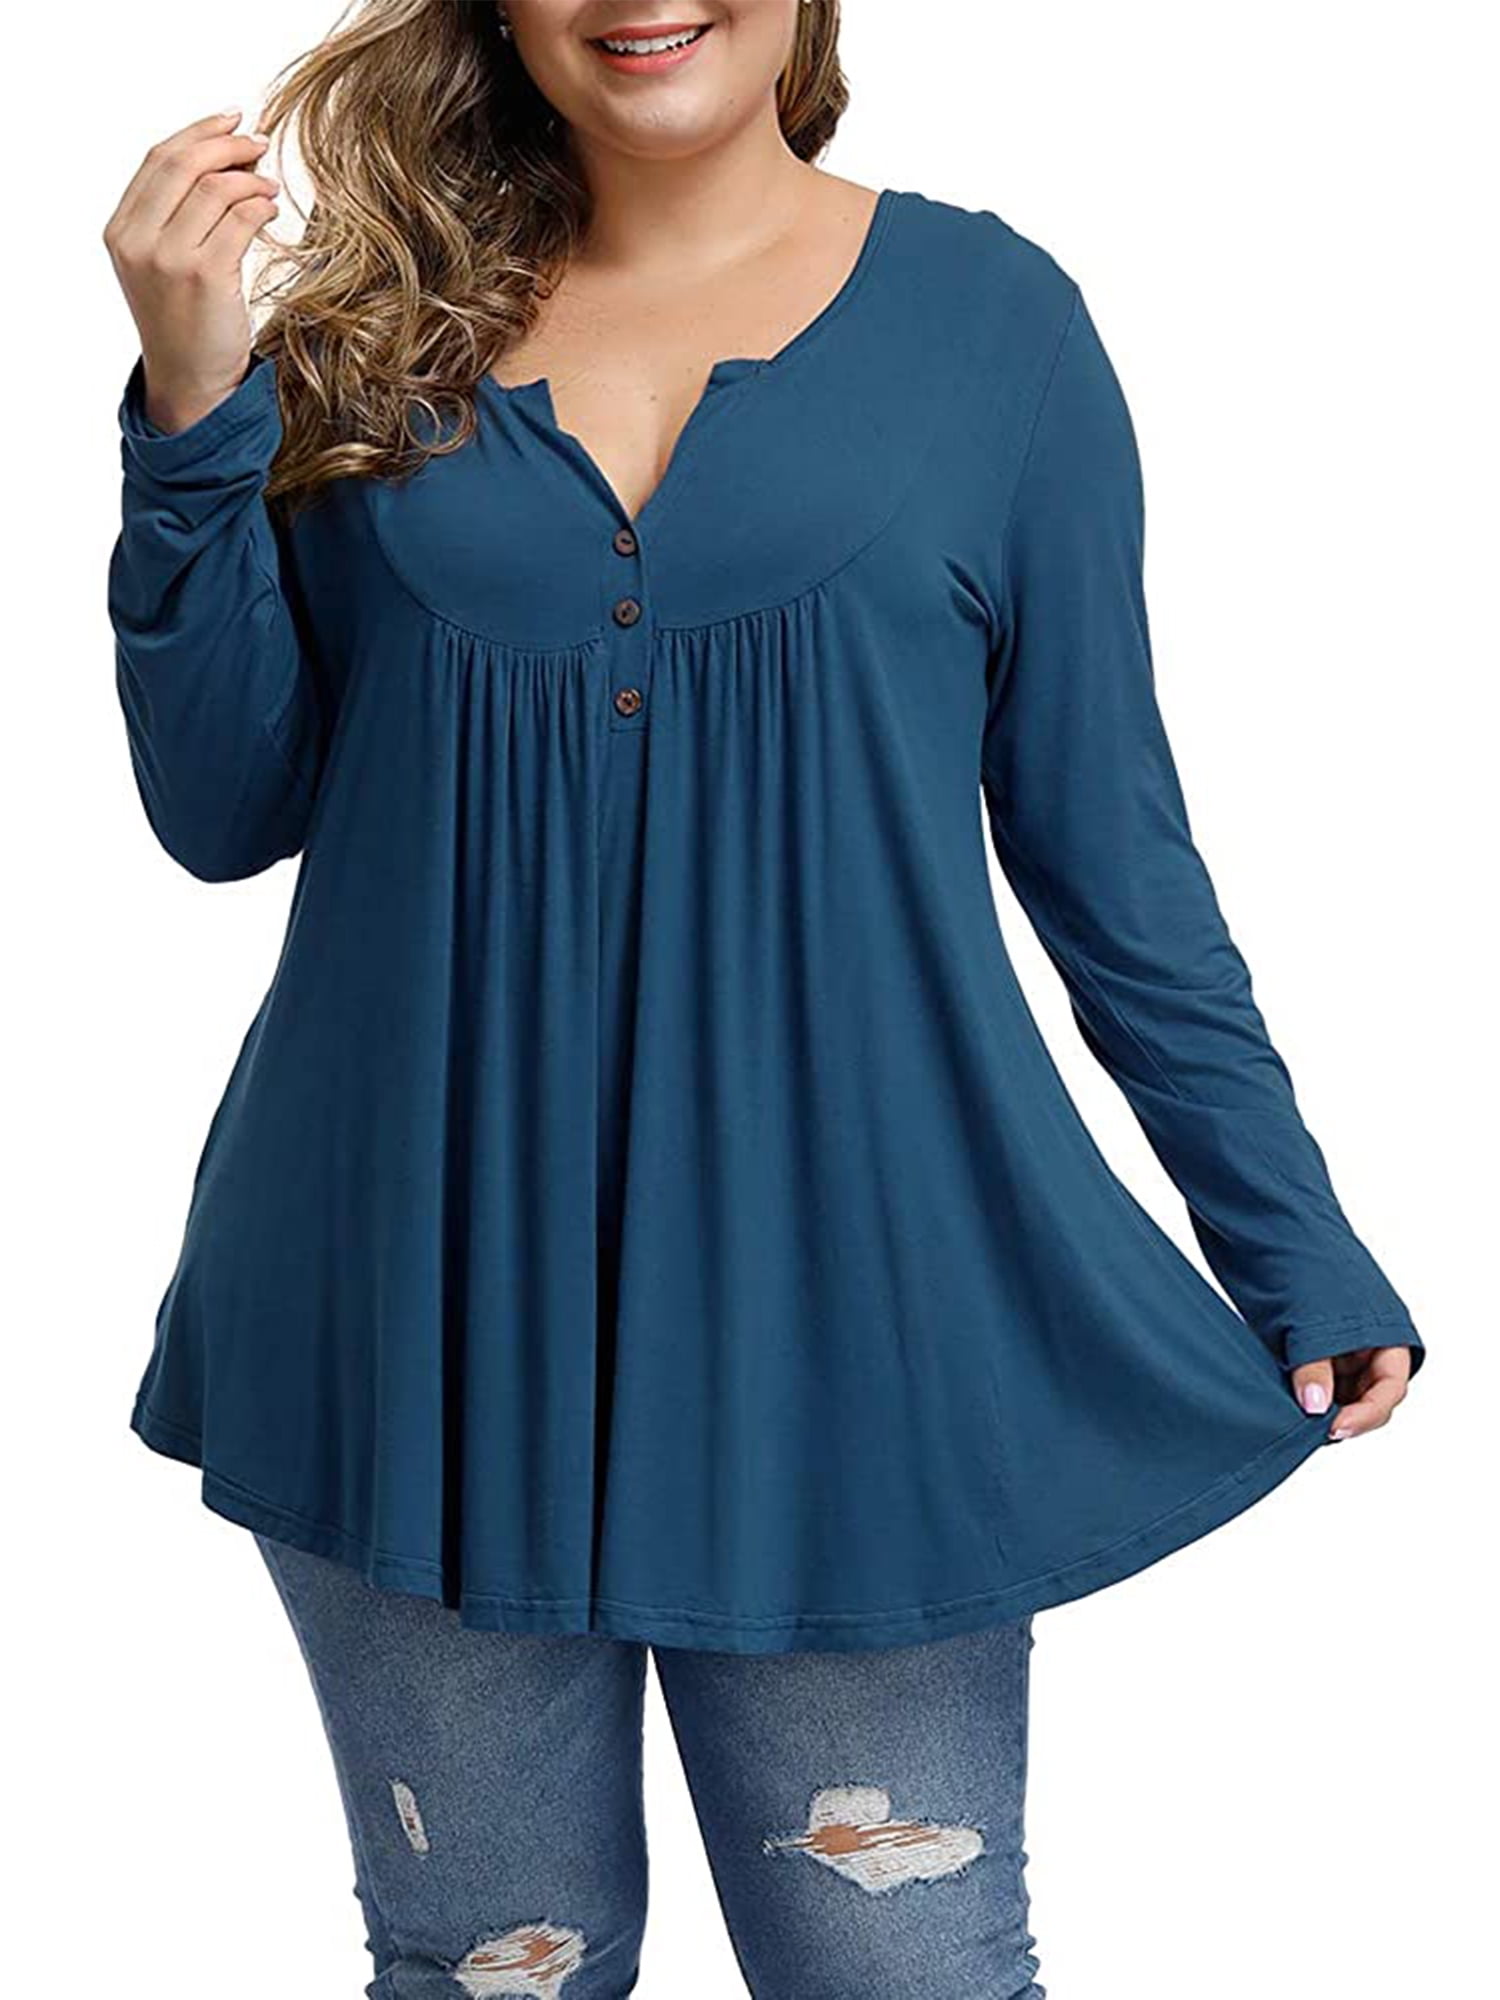 3/4 Sleeve Shirts for Women Summer Casual Lace Up Blouse V-Neck Tunic Tops Loose Flowy Henley T-Shirt Plus Size 